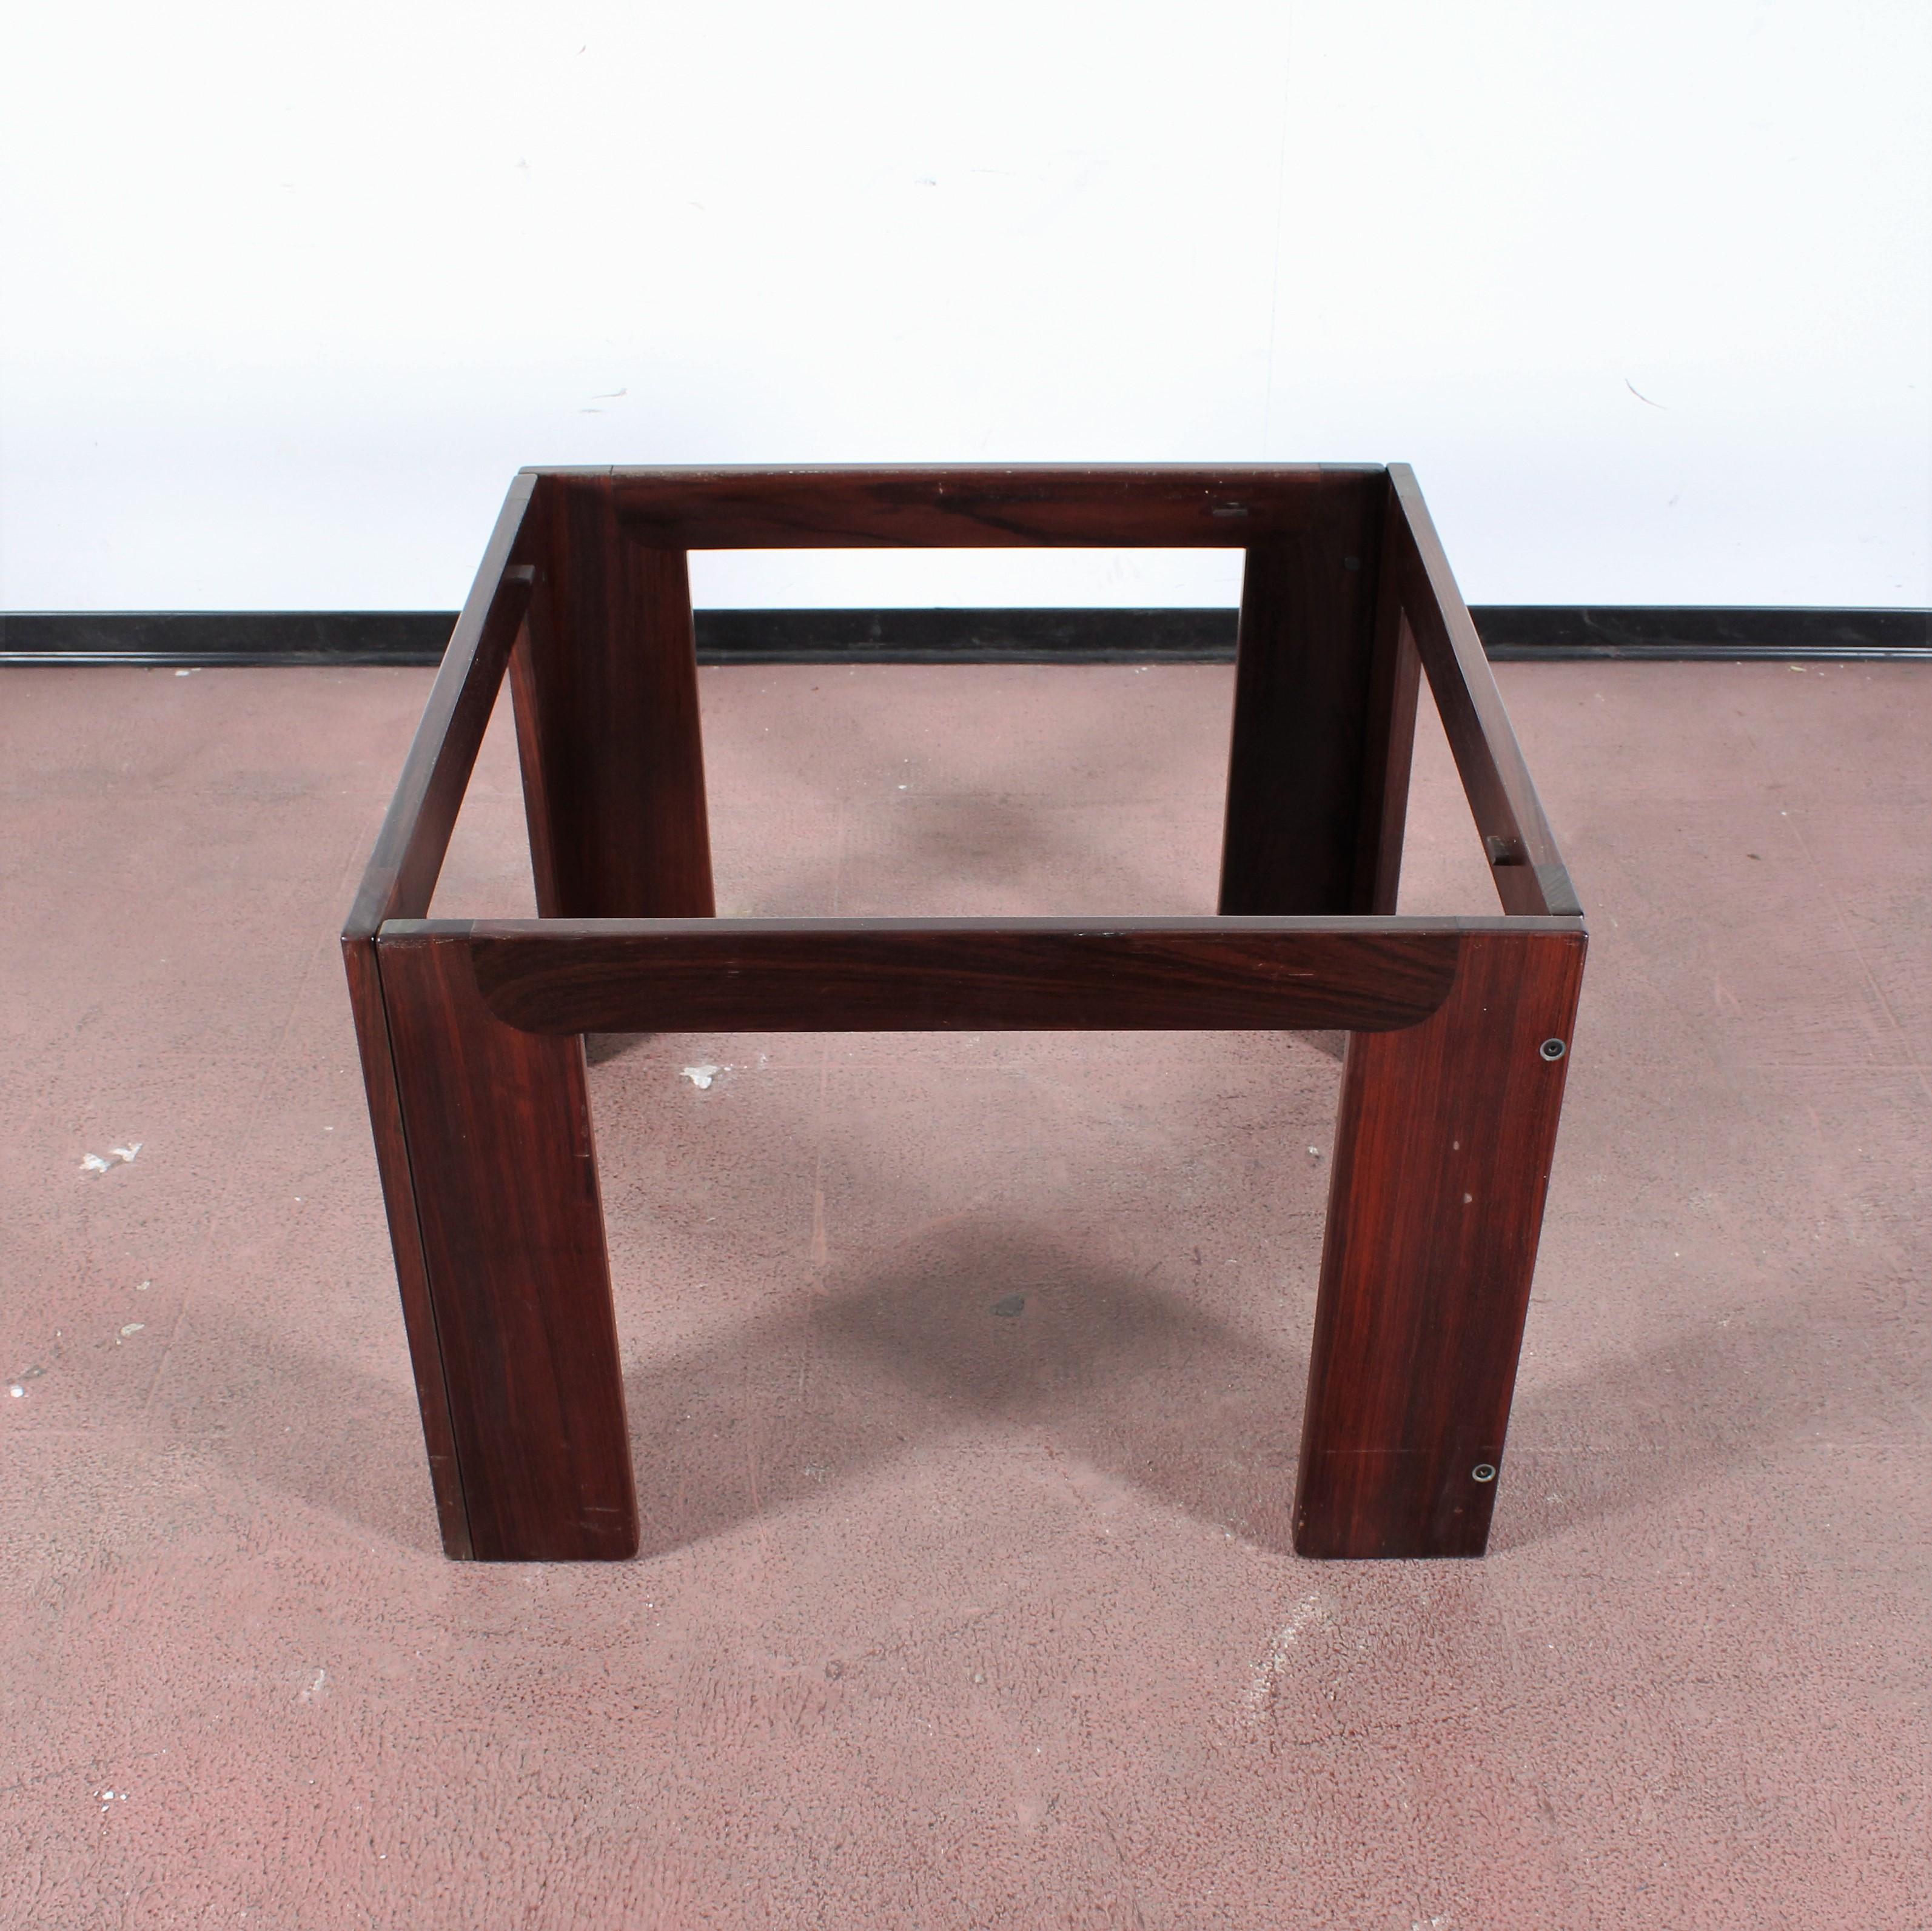 Mid-Century A. & T. Scarpa for Cassina, Meda Wood Coffee Table mod 771 '65 Italy 3